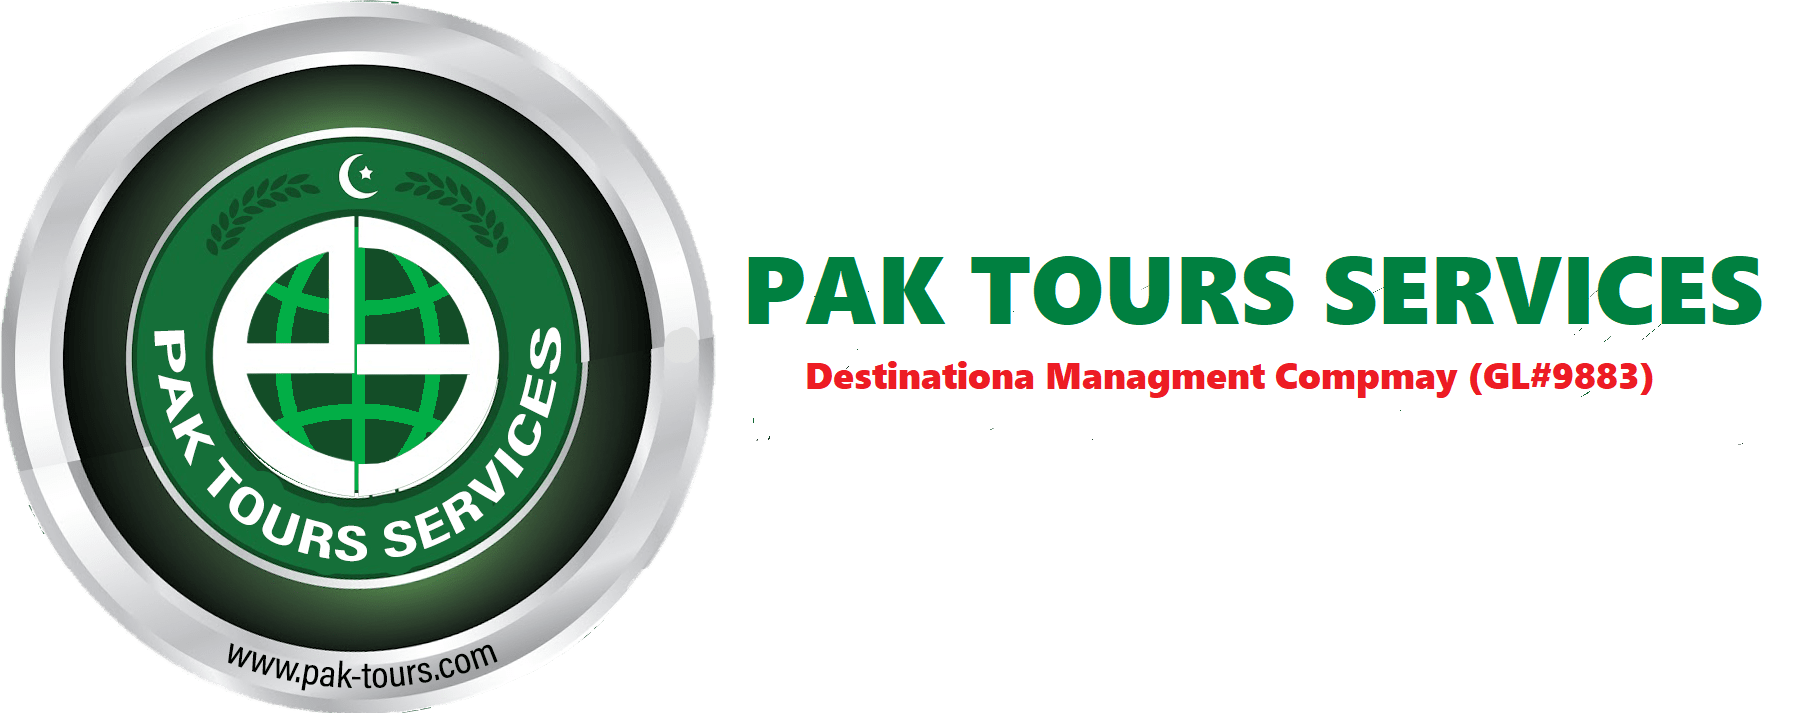 Your Trusted Travel Partner | Skardu by Air Tour Family &Honeymoon Package